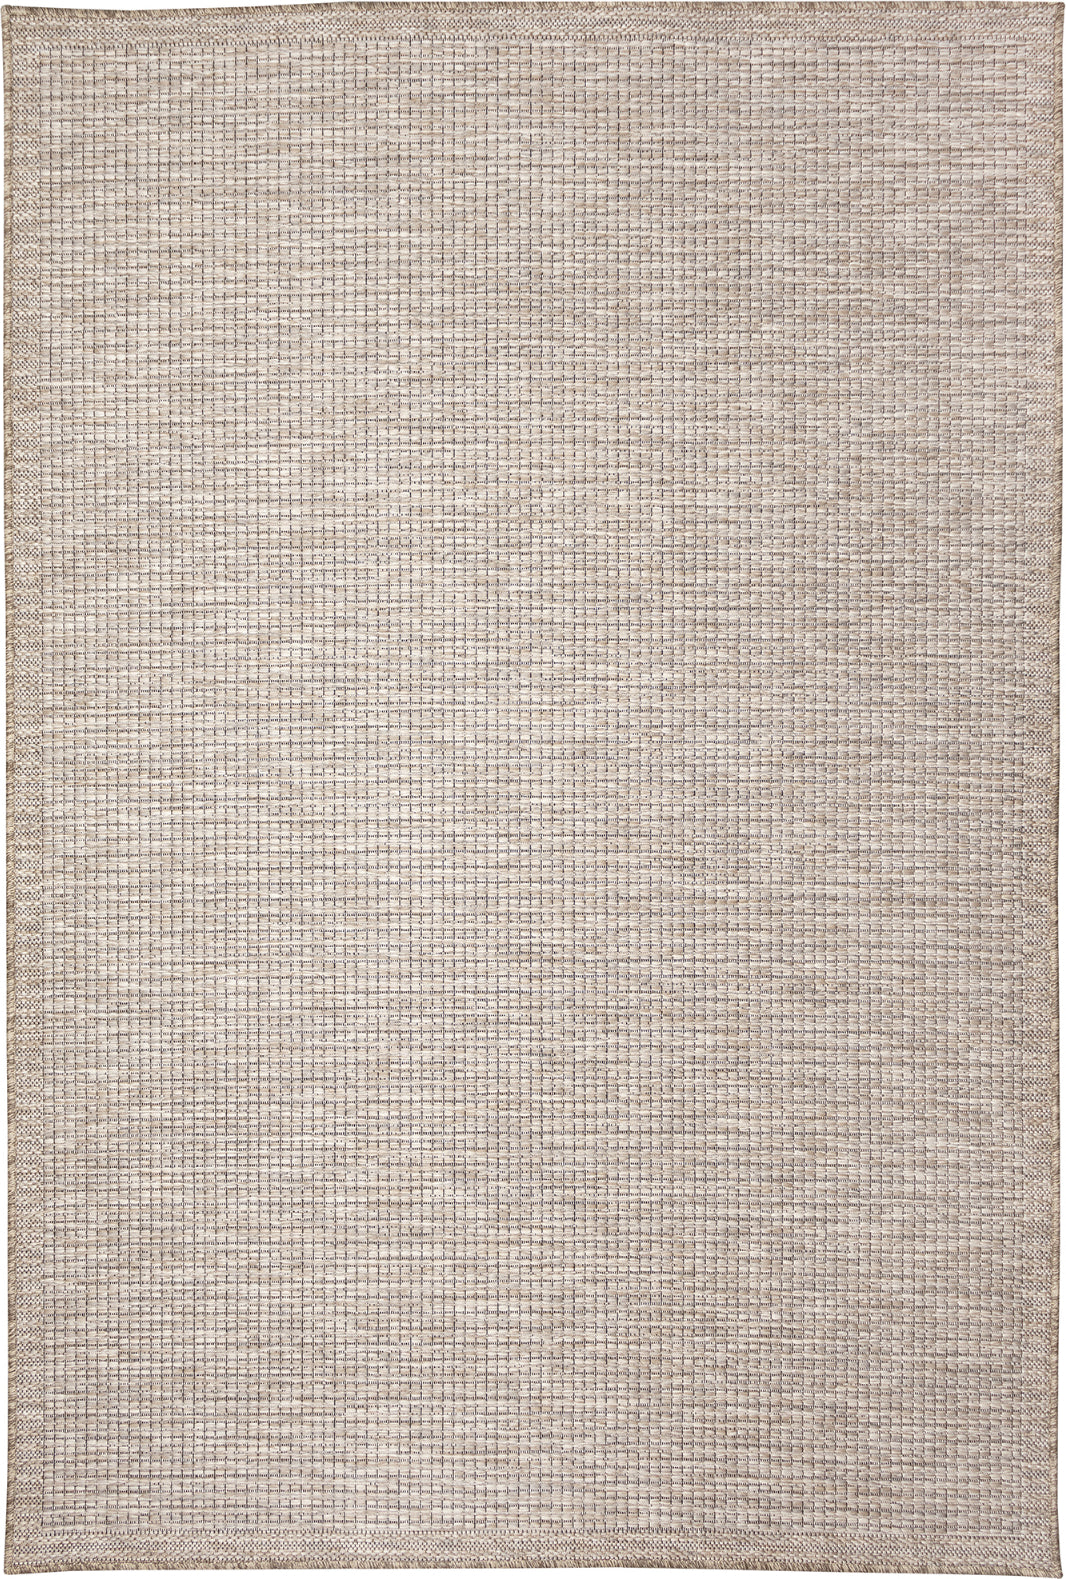 Trans Ocean Orly 6480/12 Texture Natural Area Rug main image